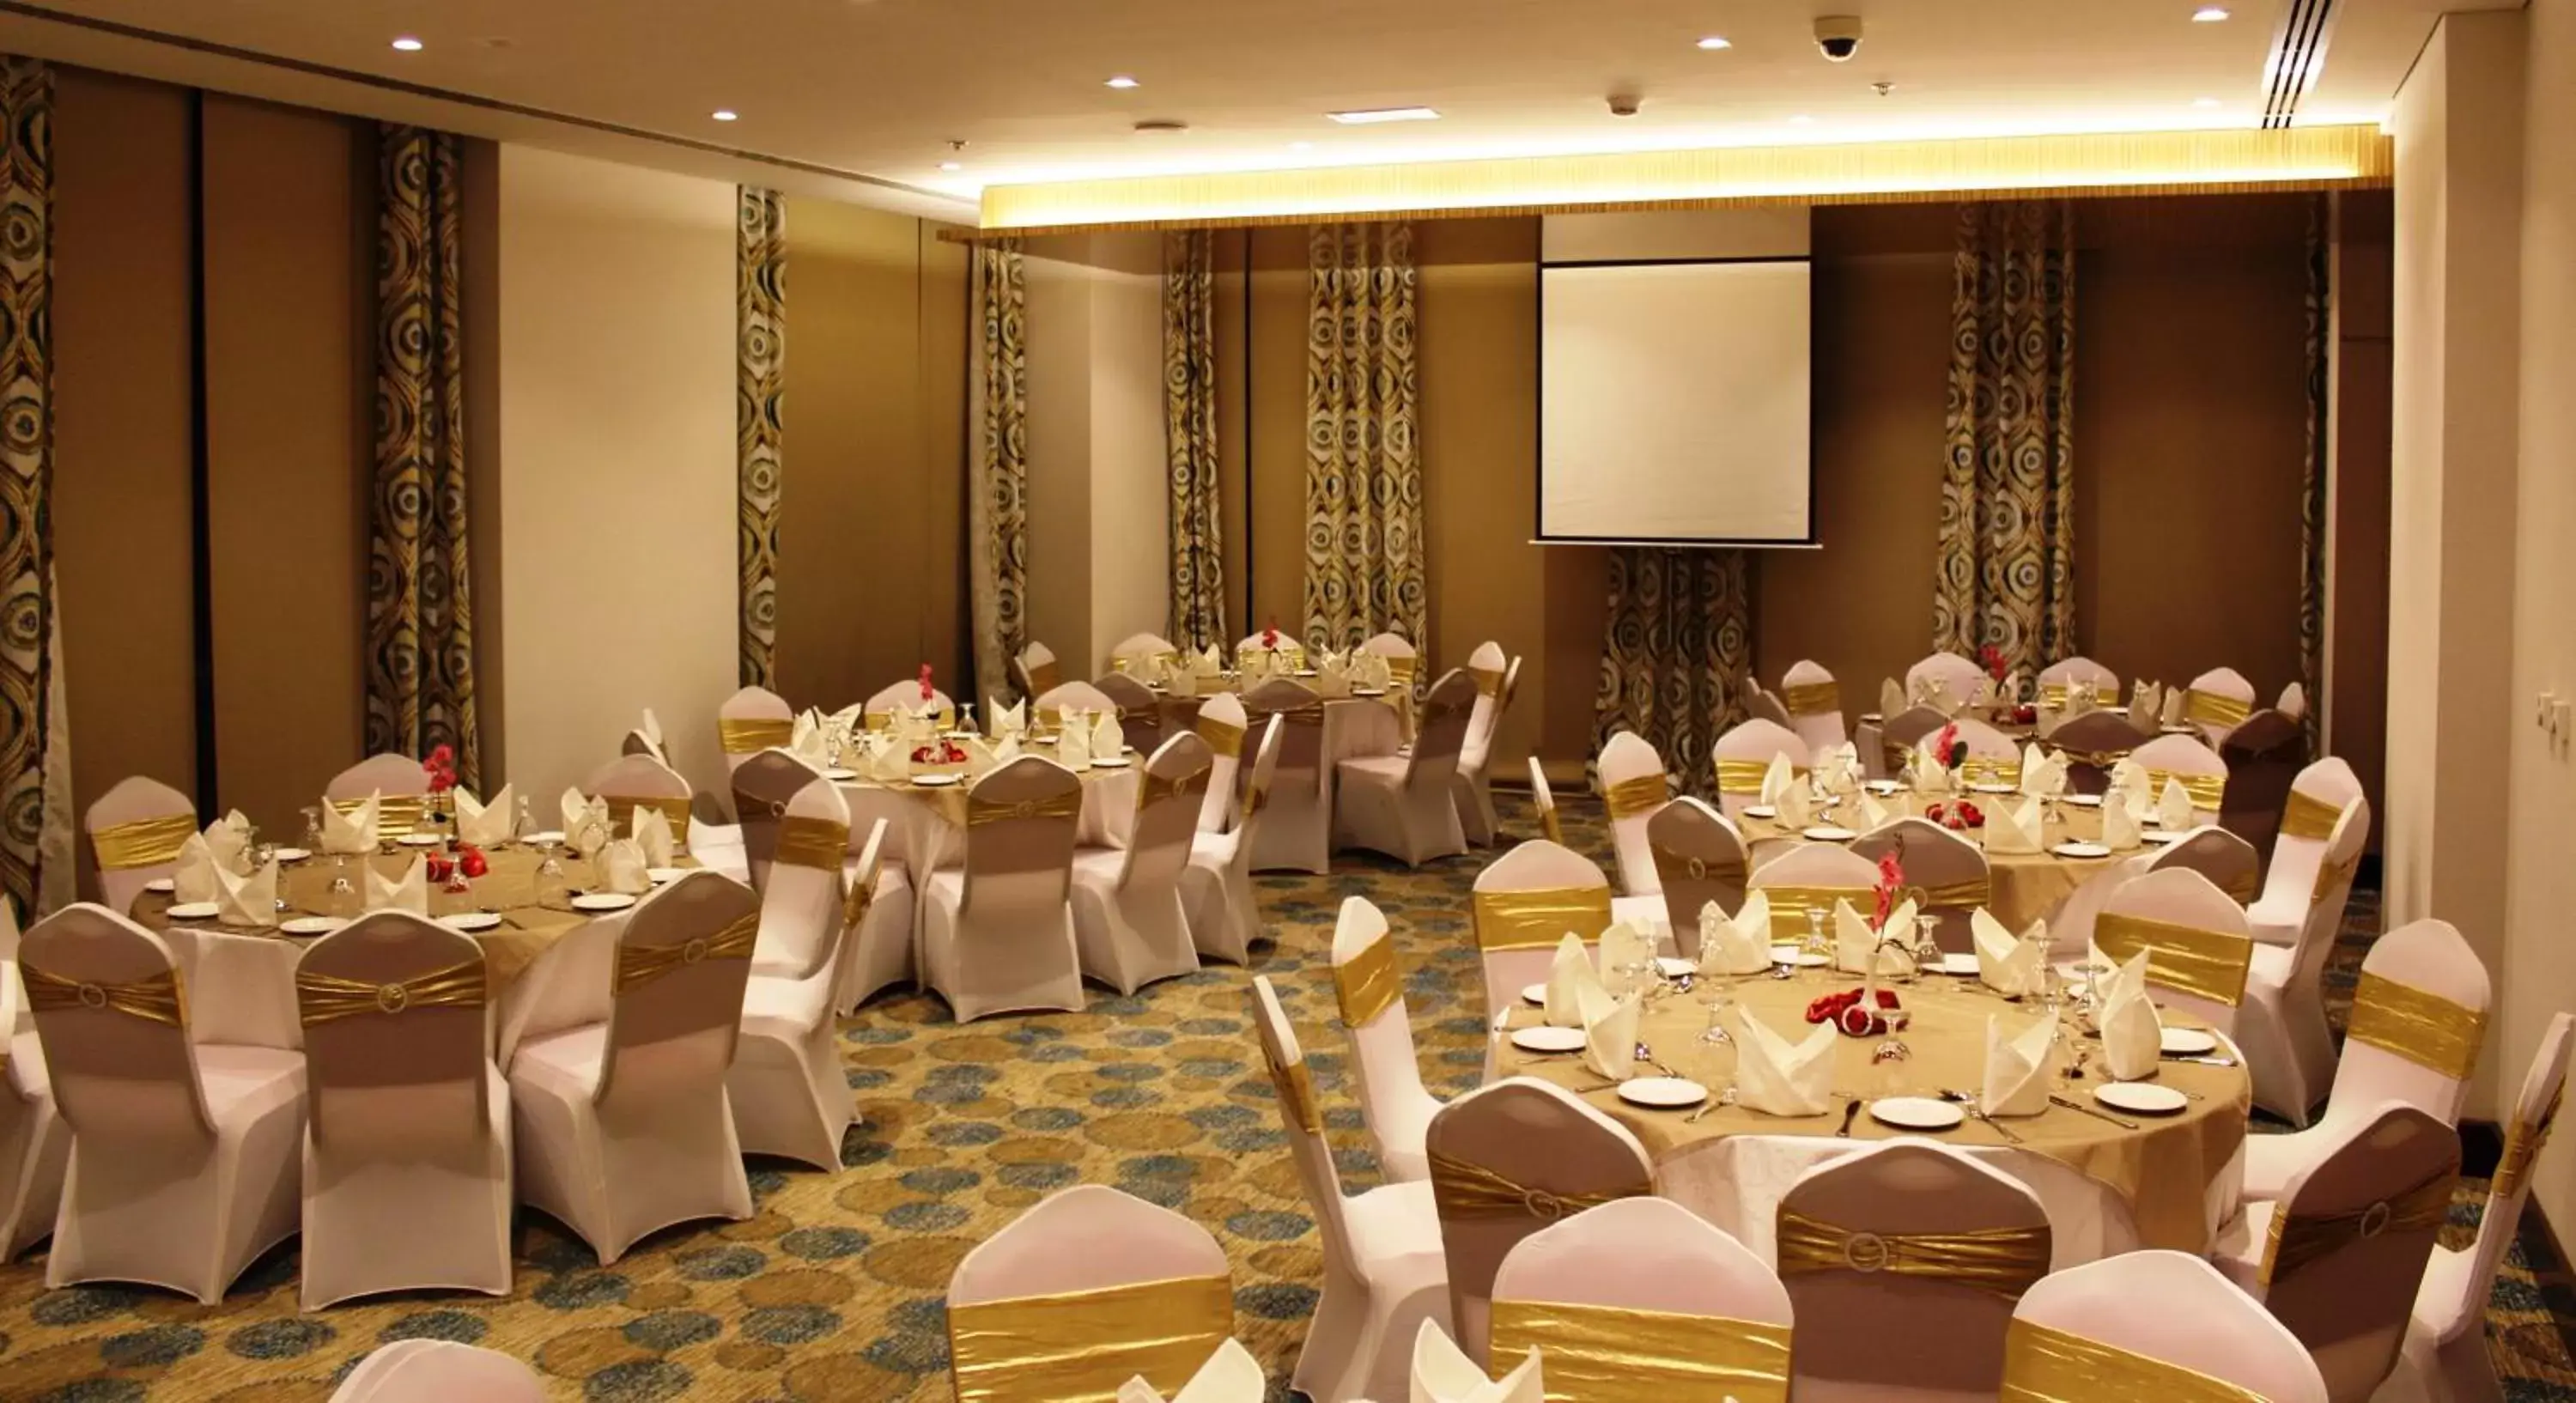 Banquet/Function facilities, Banquet Facilities in Best Western Plus Pearl Creek